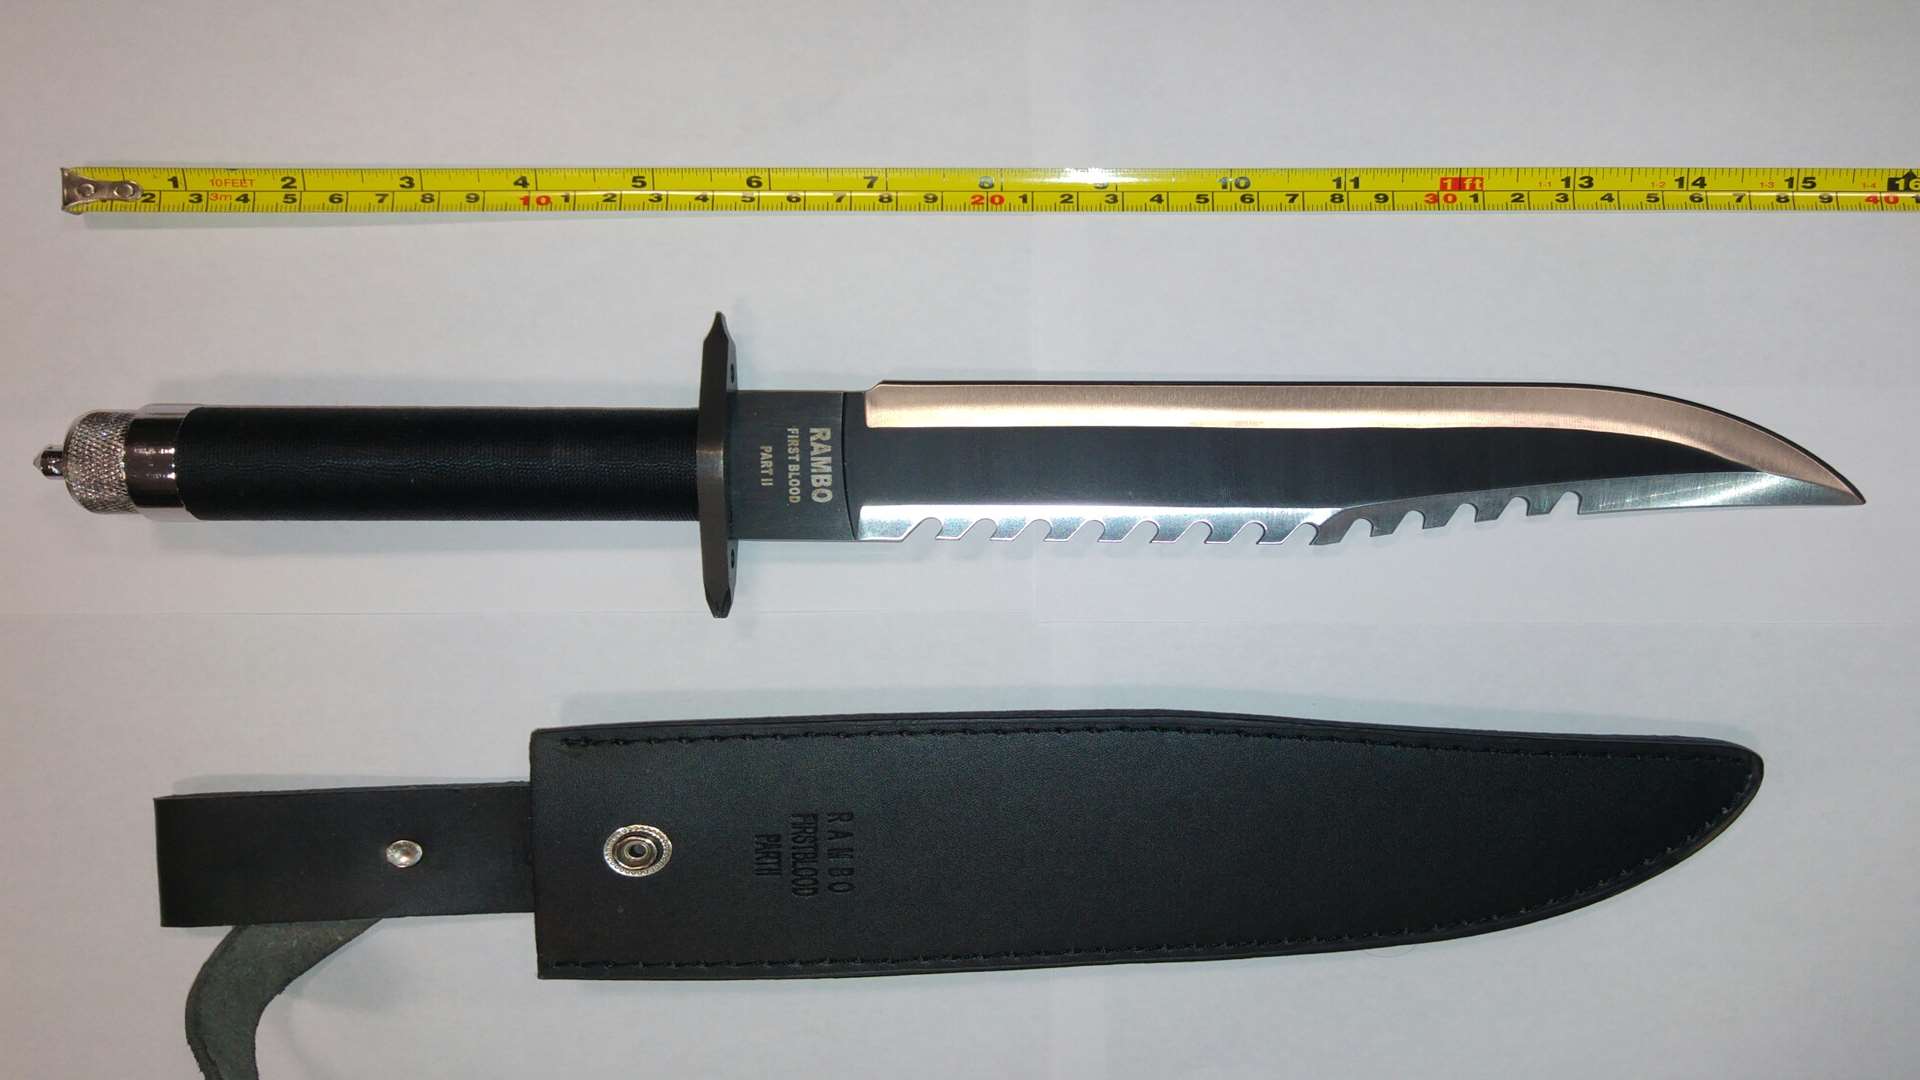 The Rambo knife seized in Gravesend. Picture: Kent Police